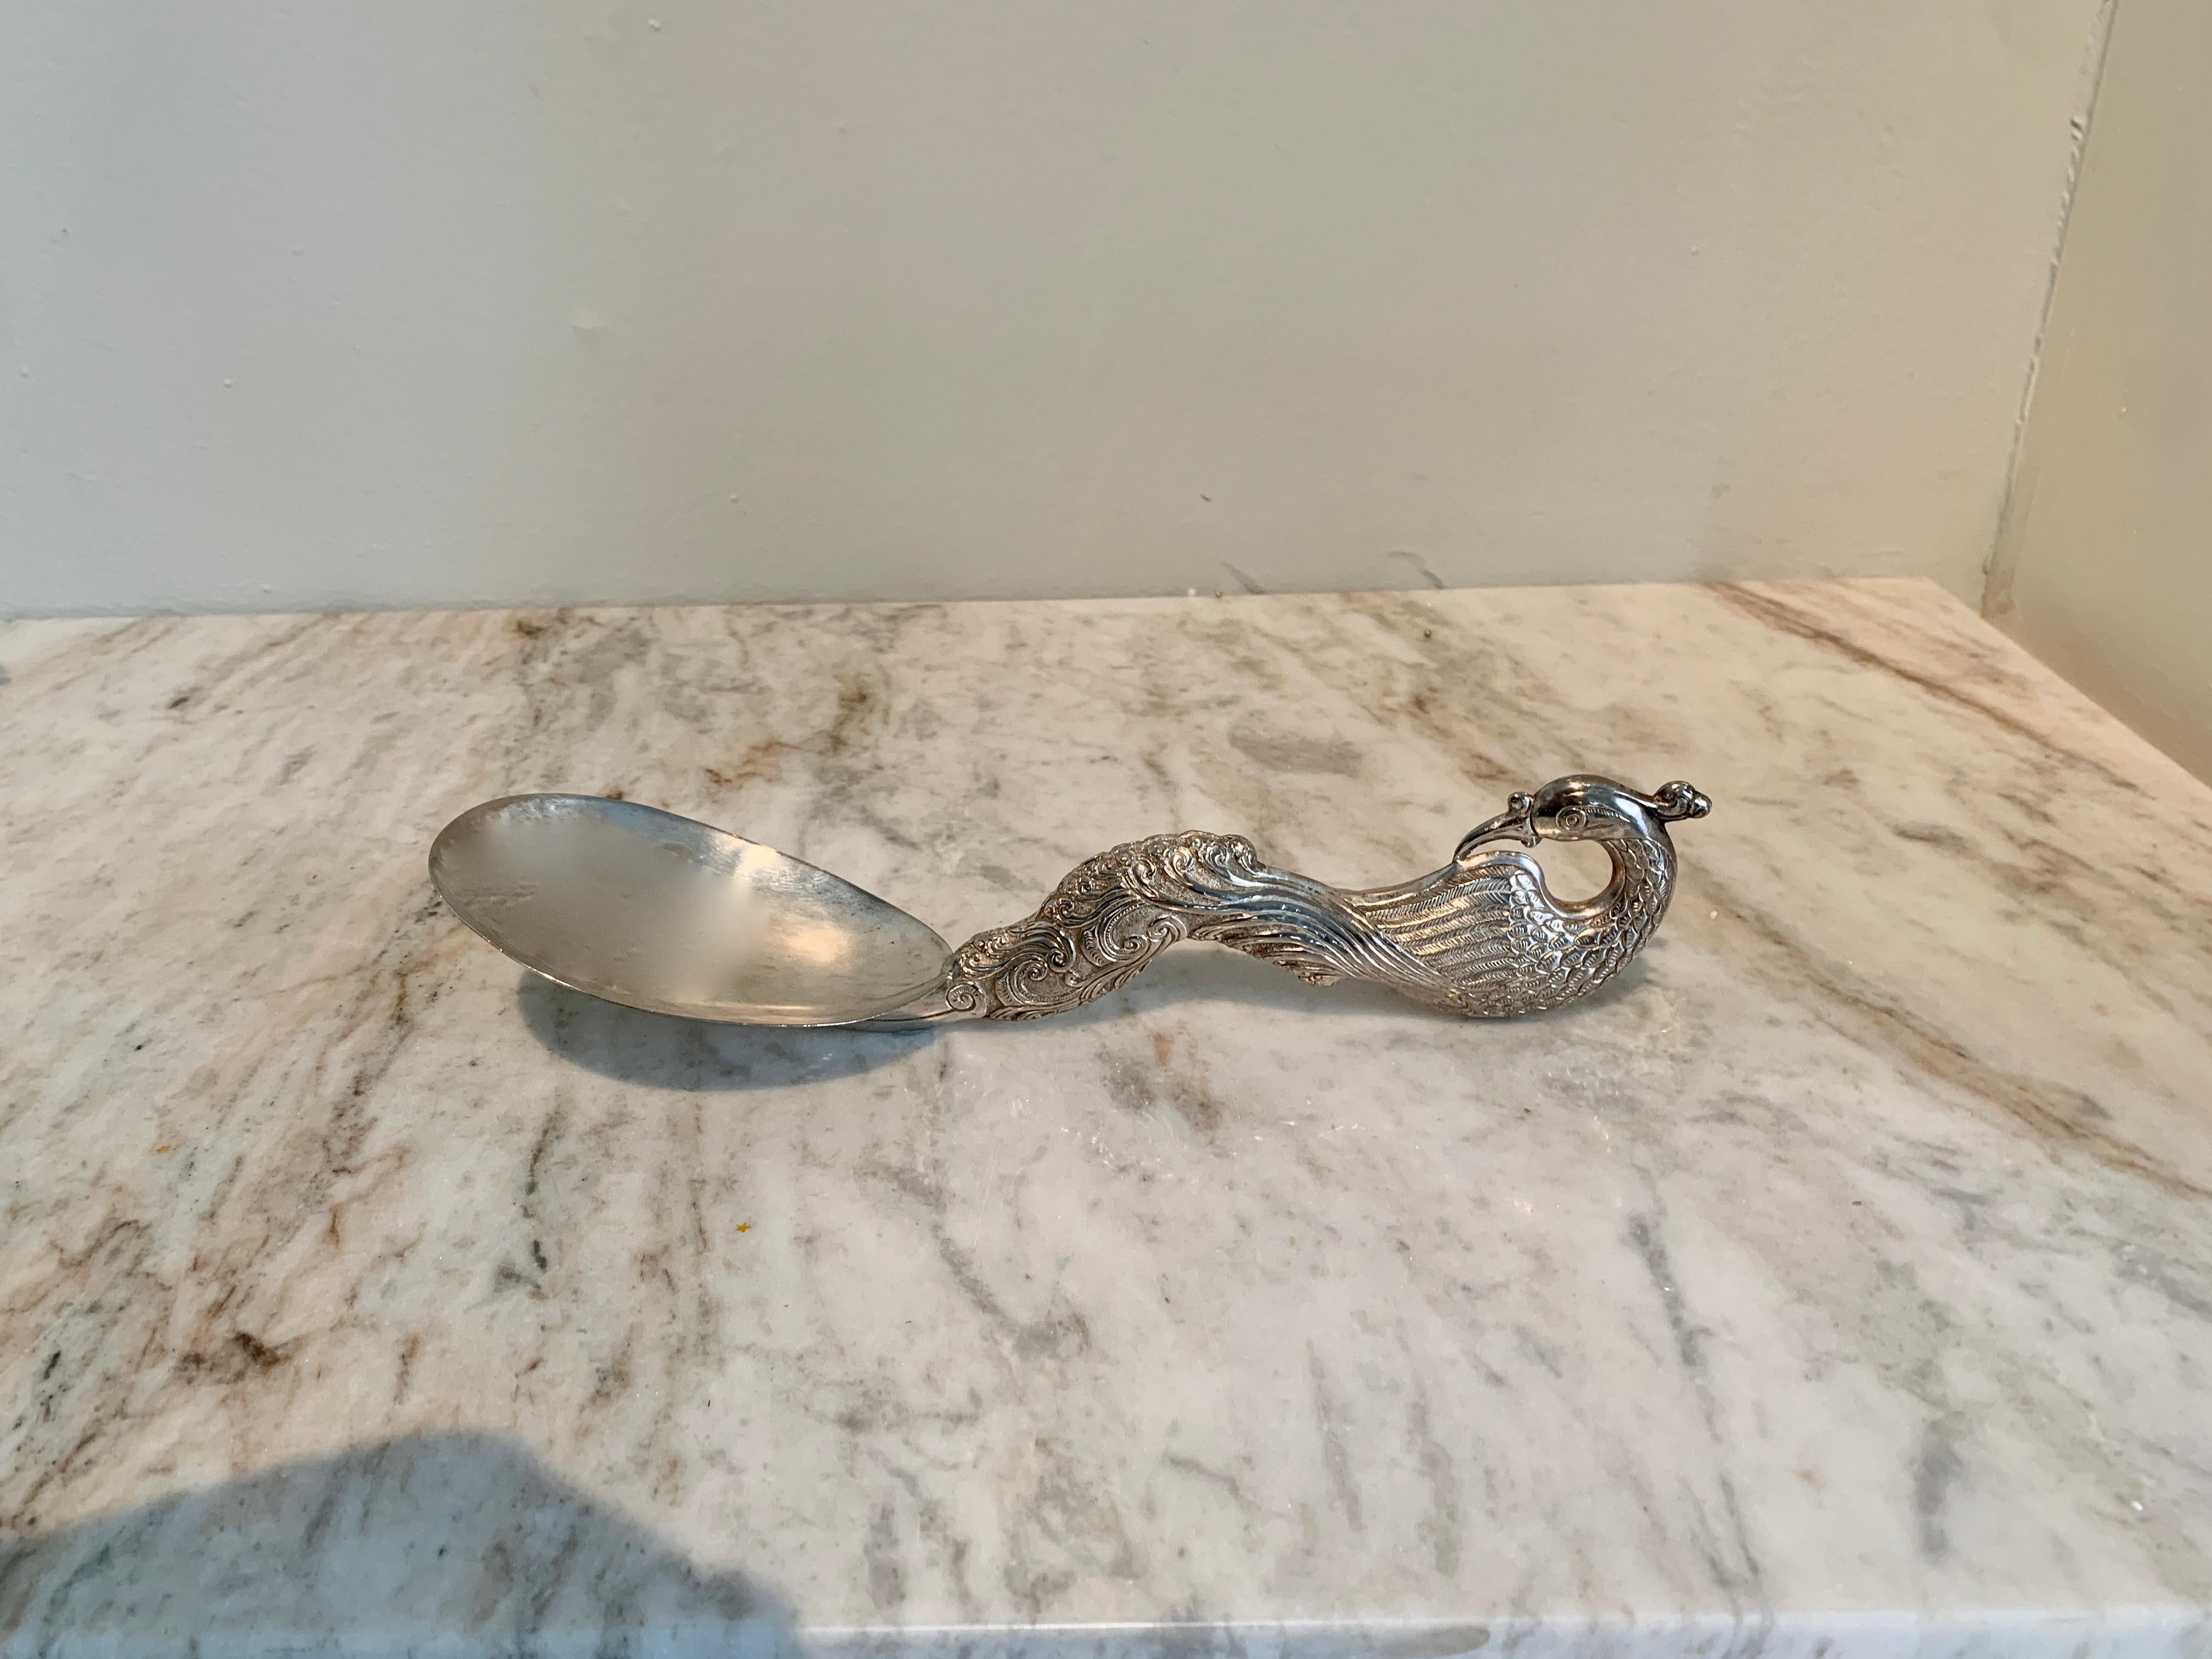 Patinated Silver Repoussé Serving Spoon with Peacock For Sale